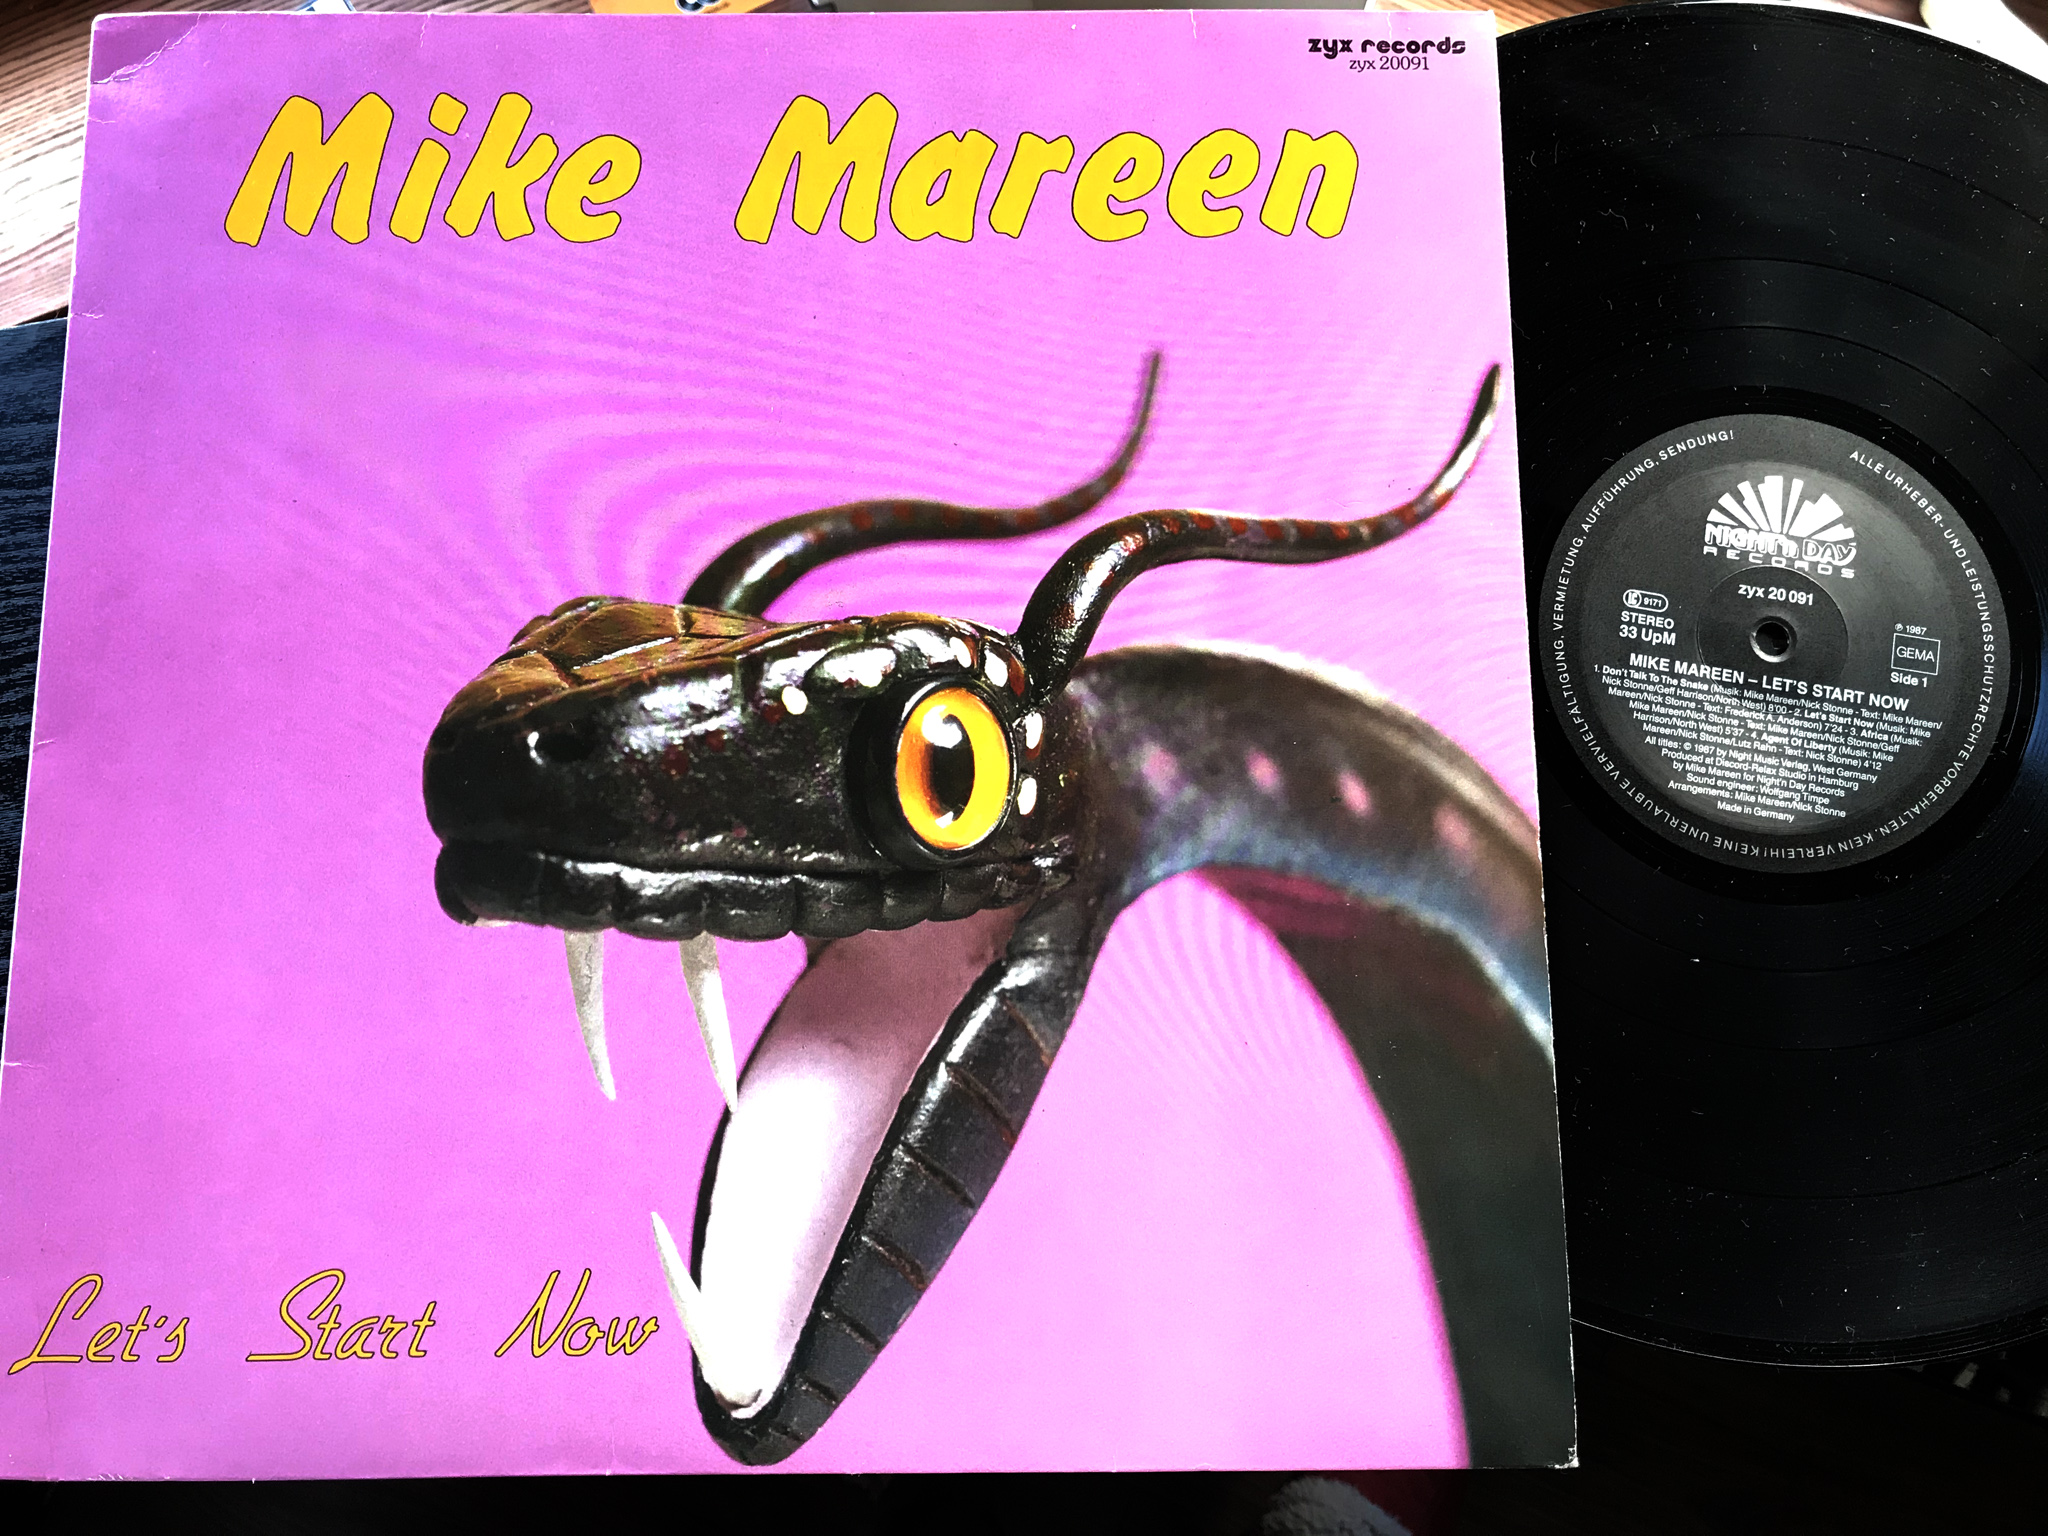 Mike Mareen - Let's Start Now LP